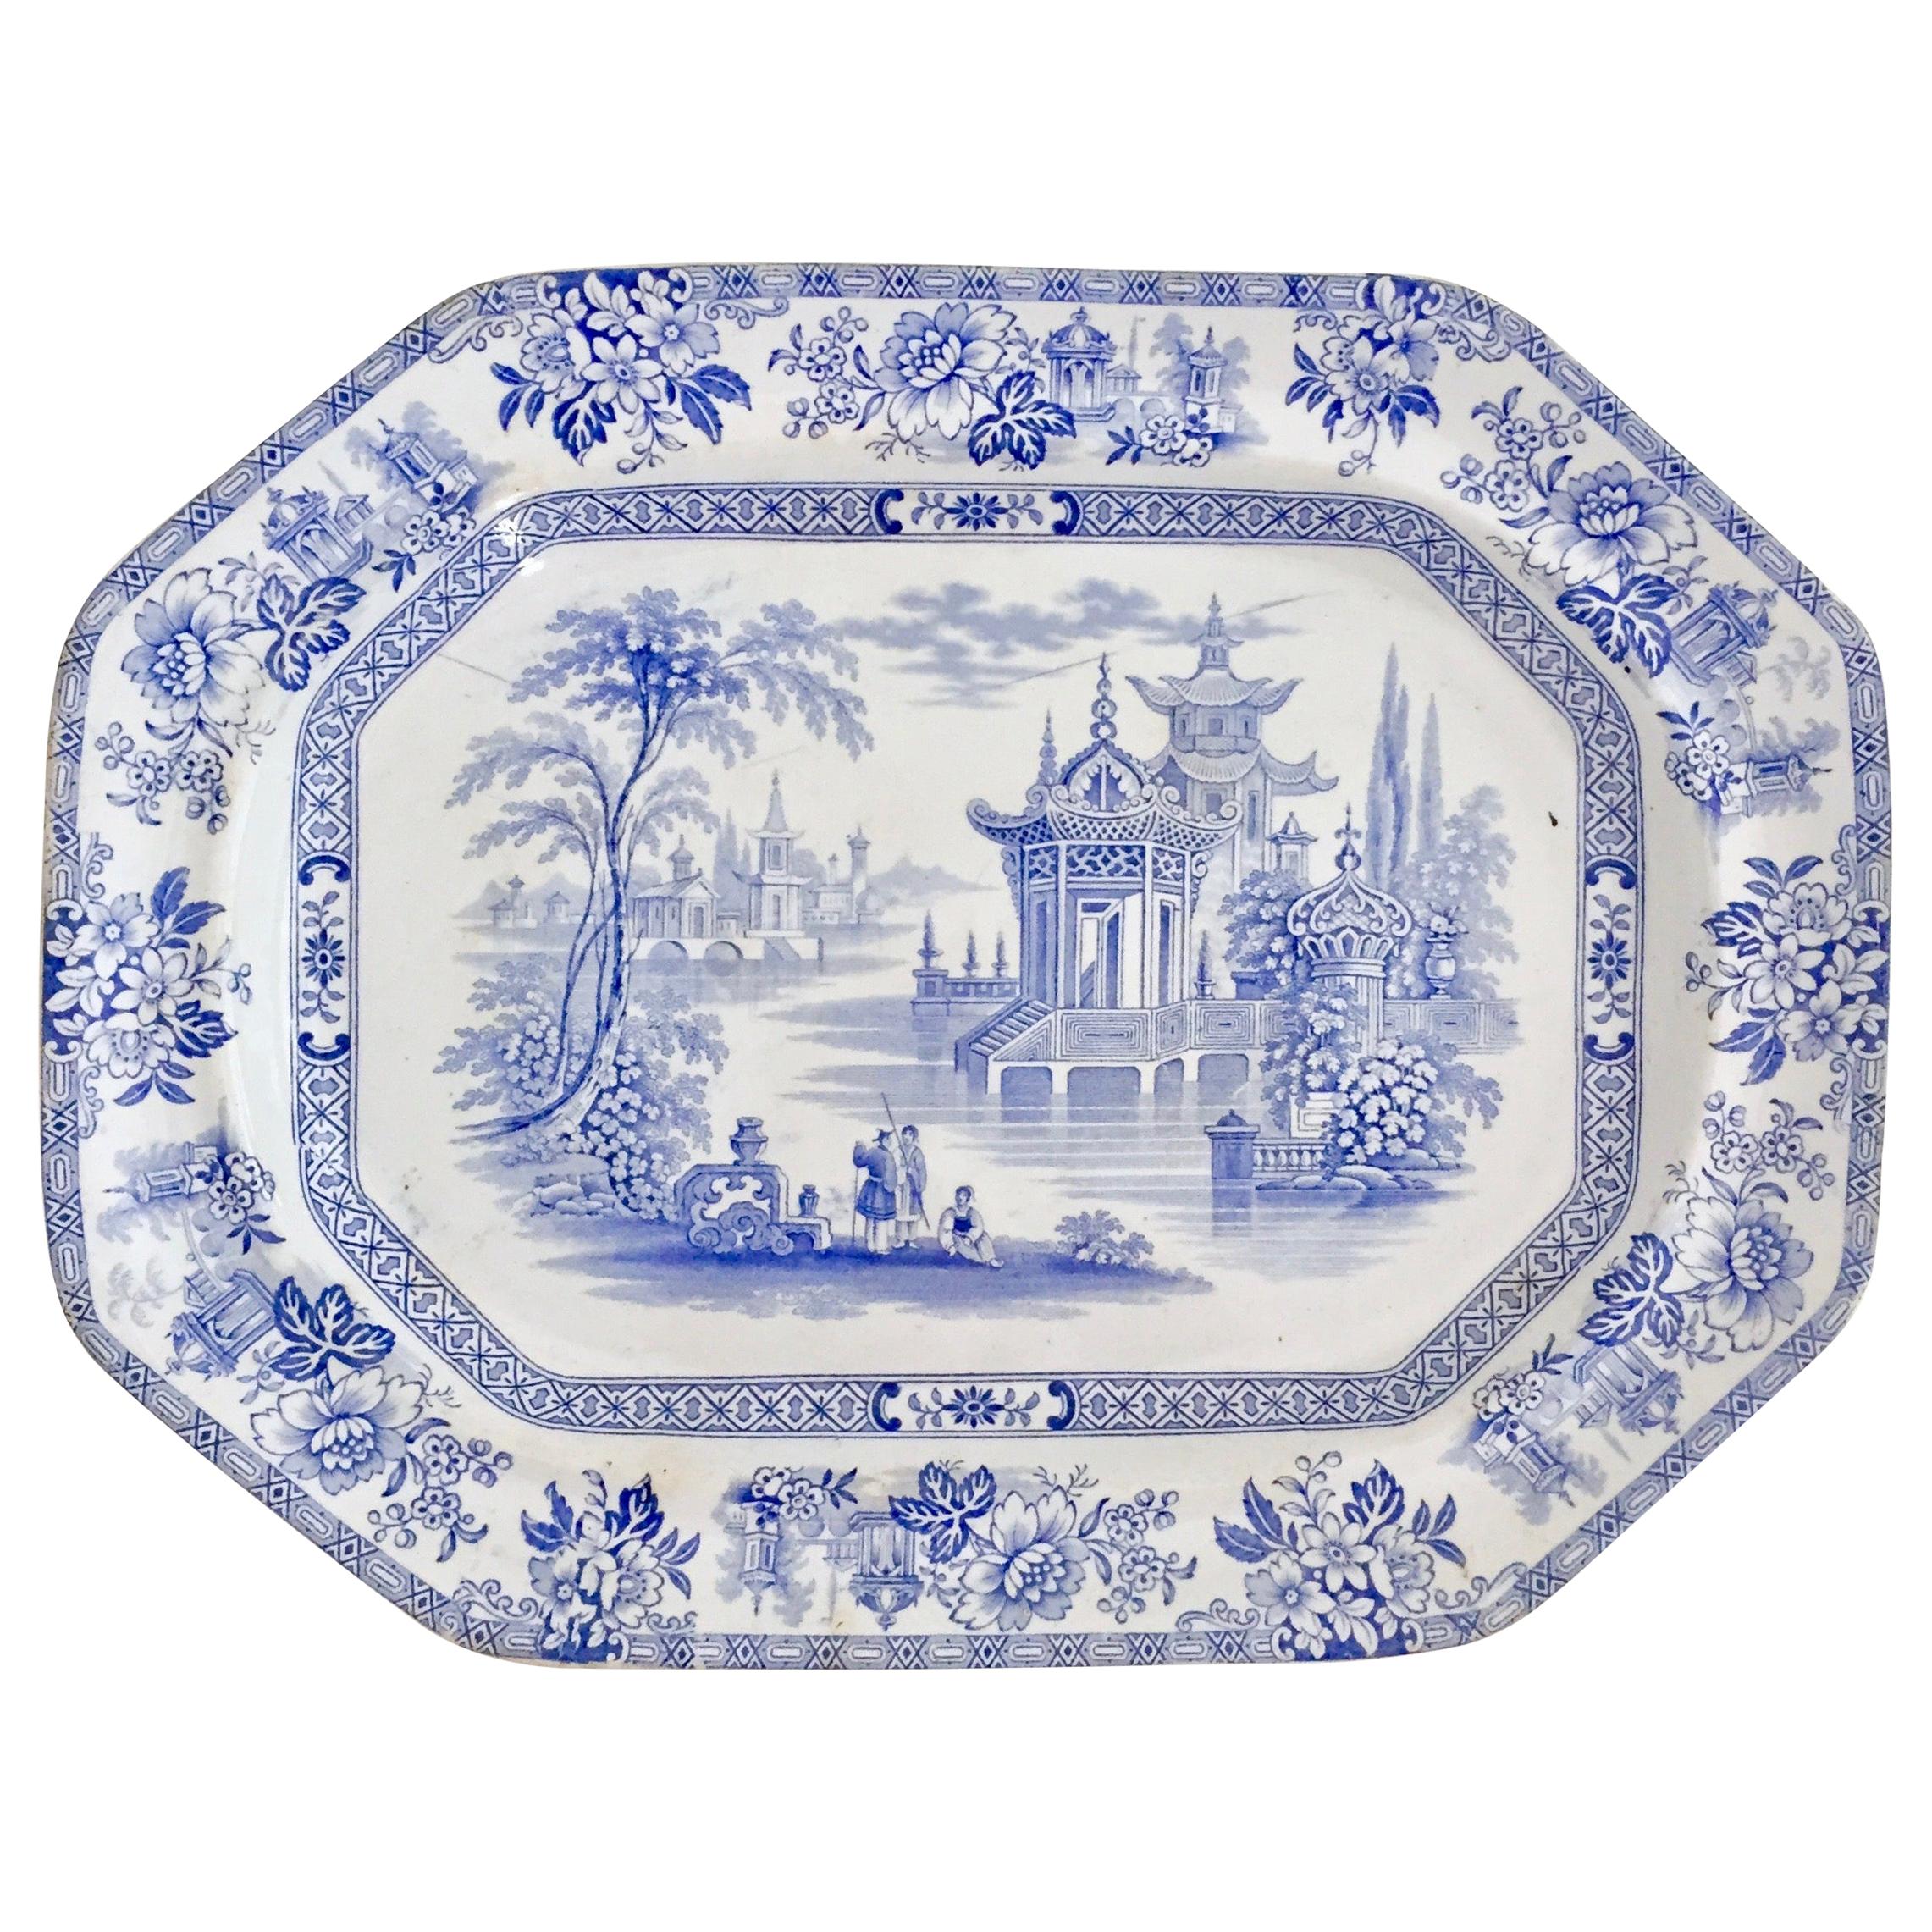 Wood & Brownfield Pottery Platter, Blue & White Transfer, Madras, Victorian 1845